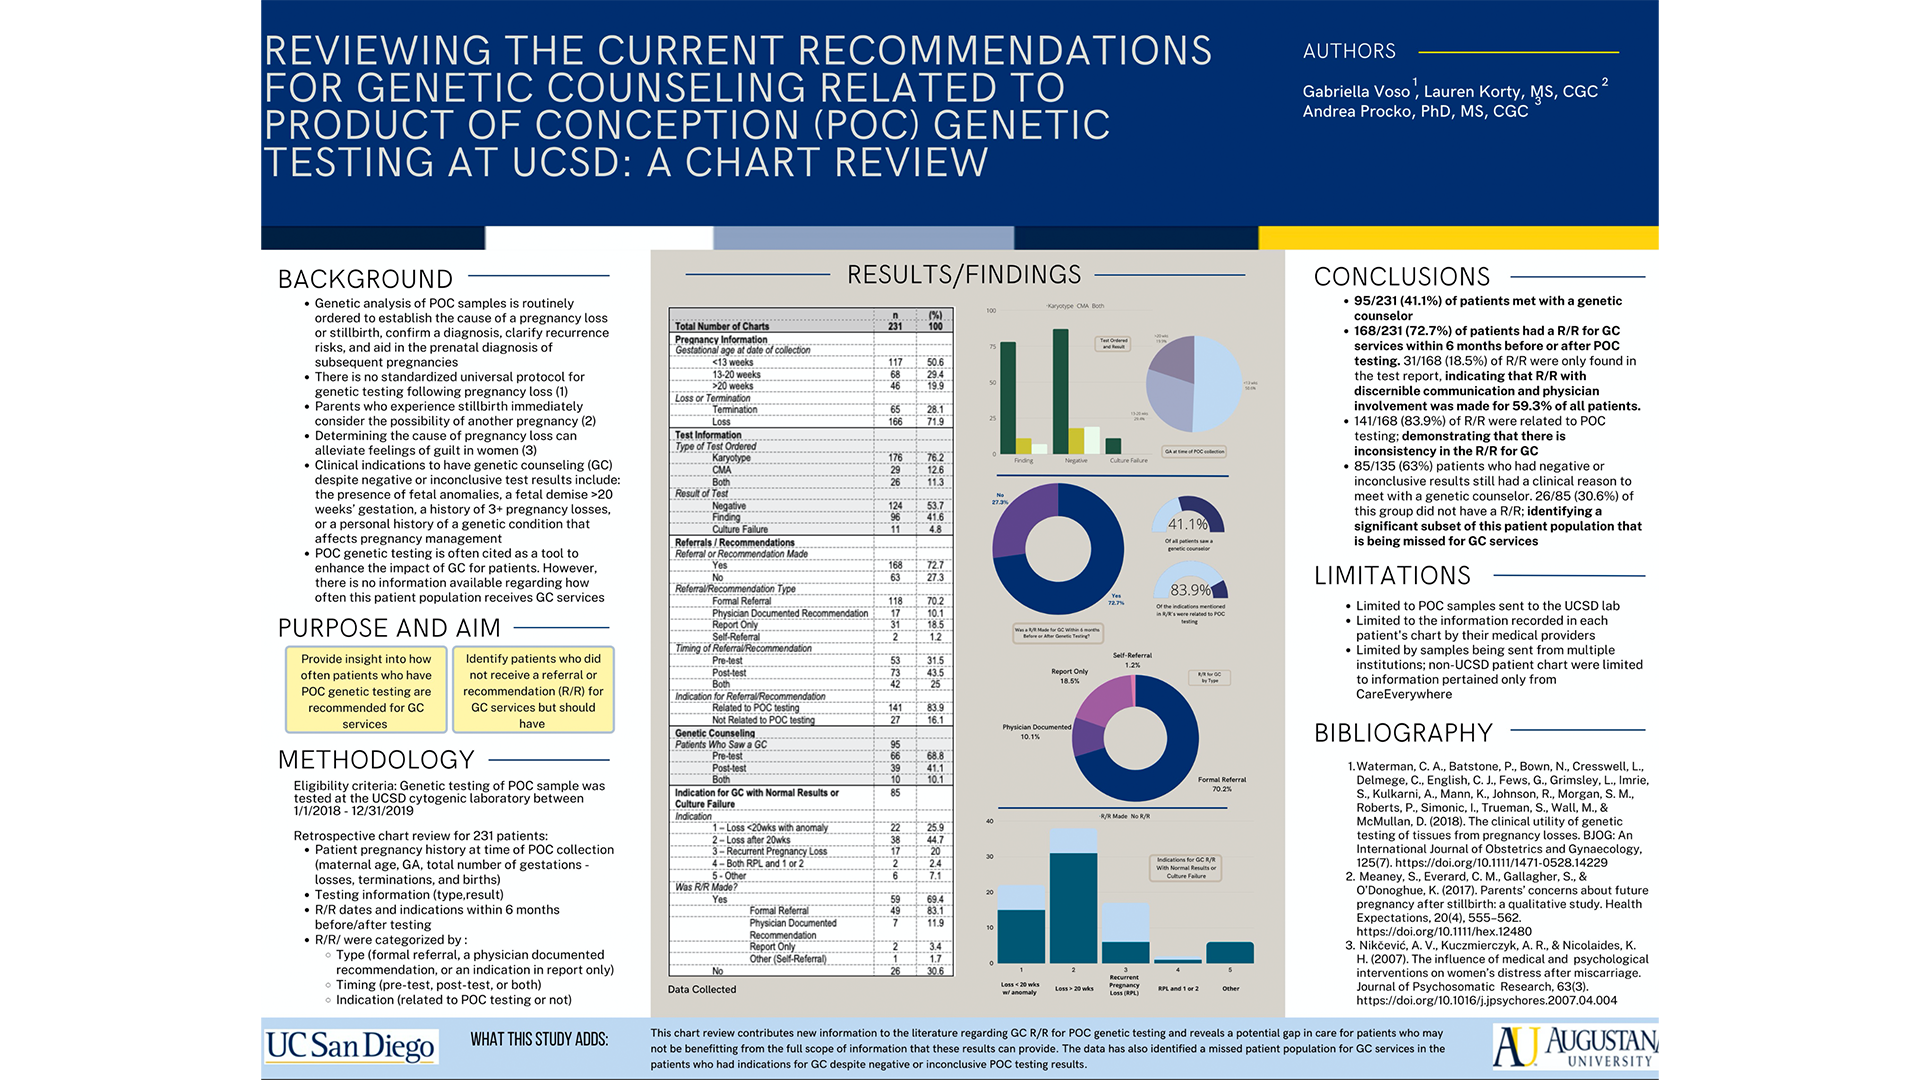 Reviewing The Current Recommendations For Genetic Counseling Related To Product Of Conception (POC) Genetic Testing At UCSD- A Chart Review Poster